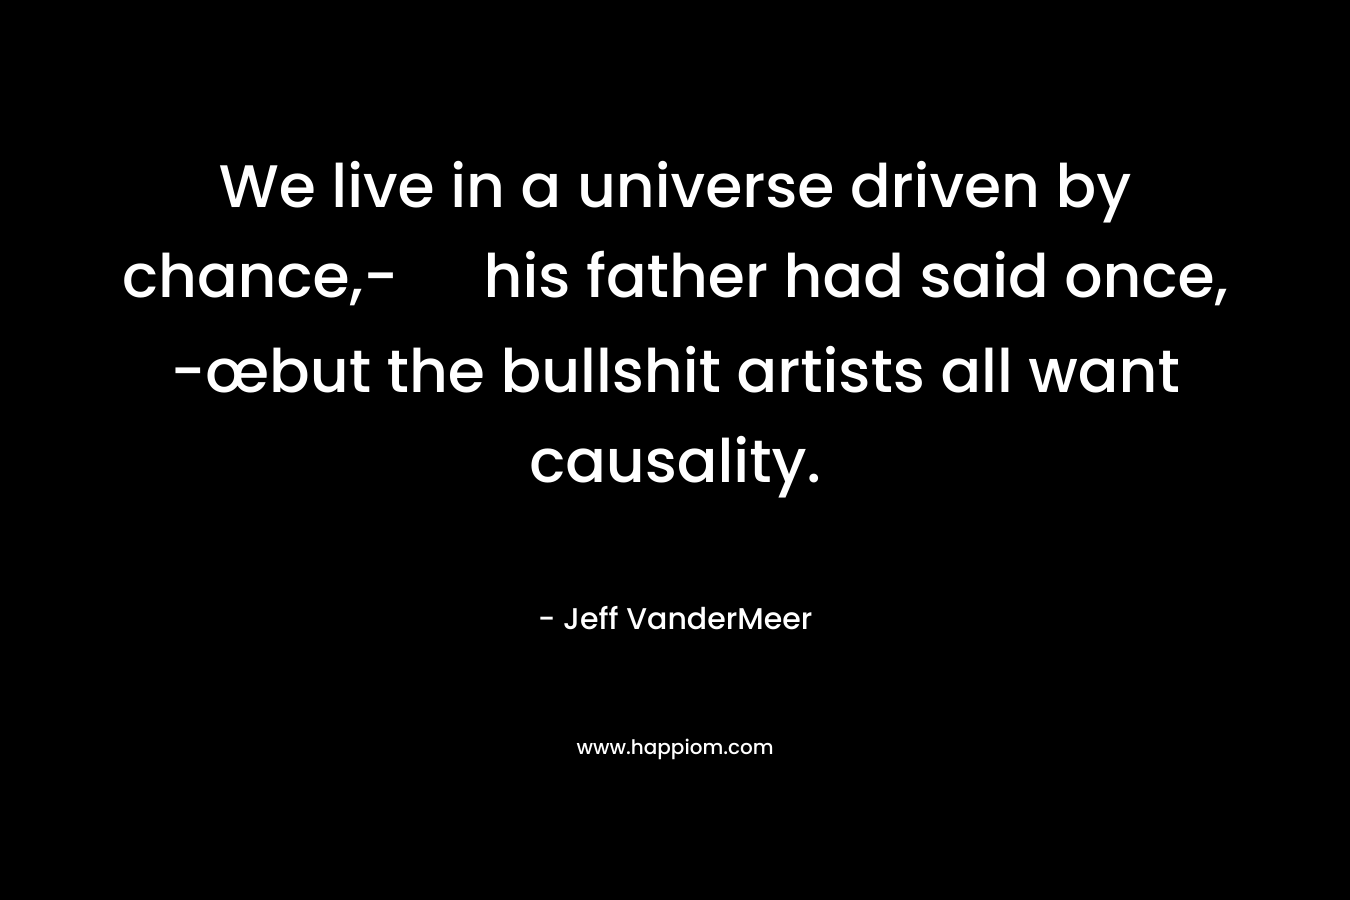 We live in a universe driven by chance,- his father had said once, -œbut the bullshit artists all want causality.